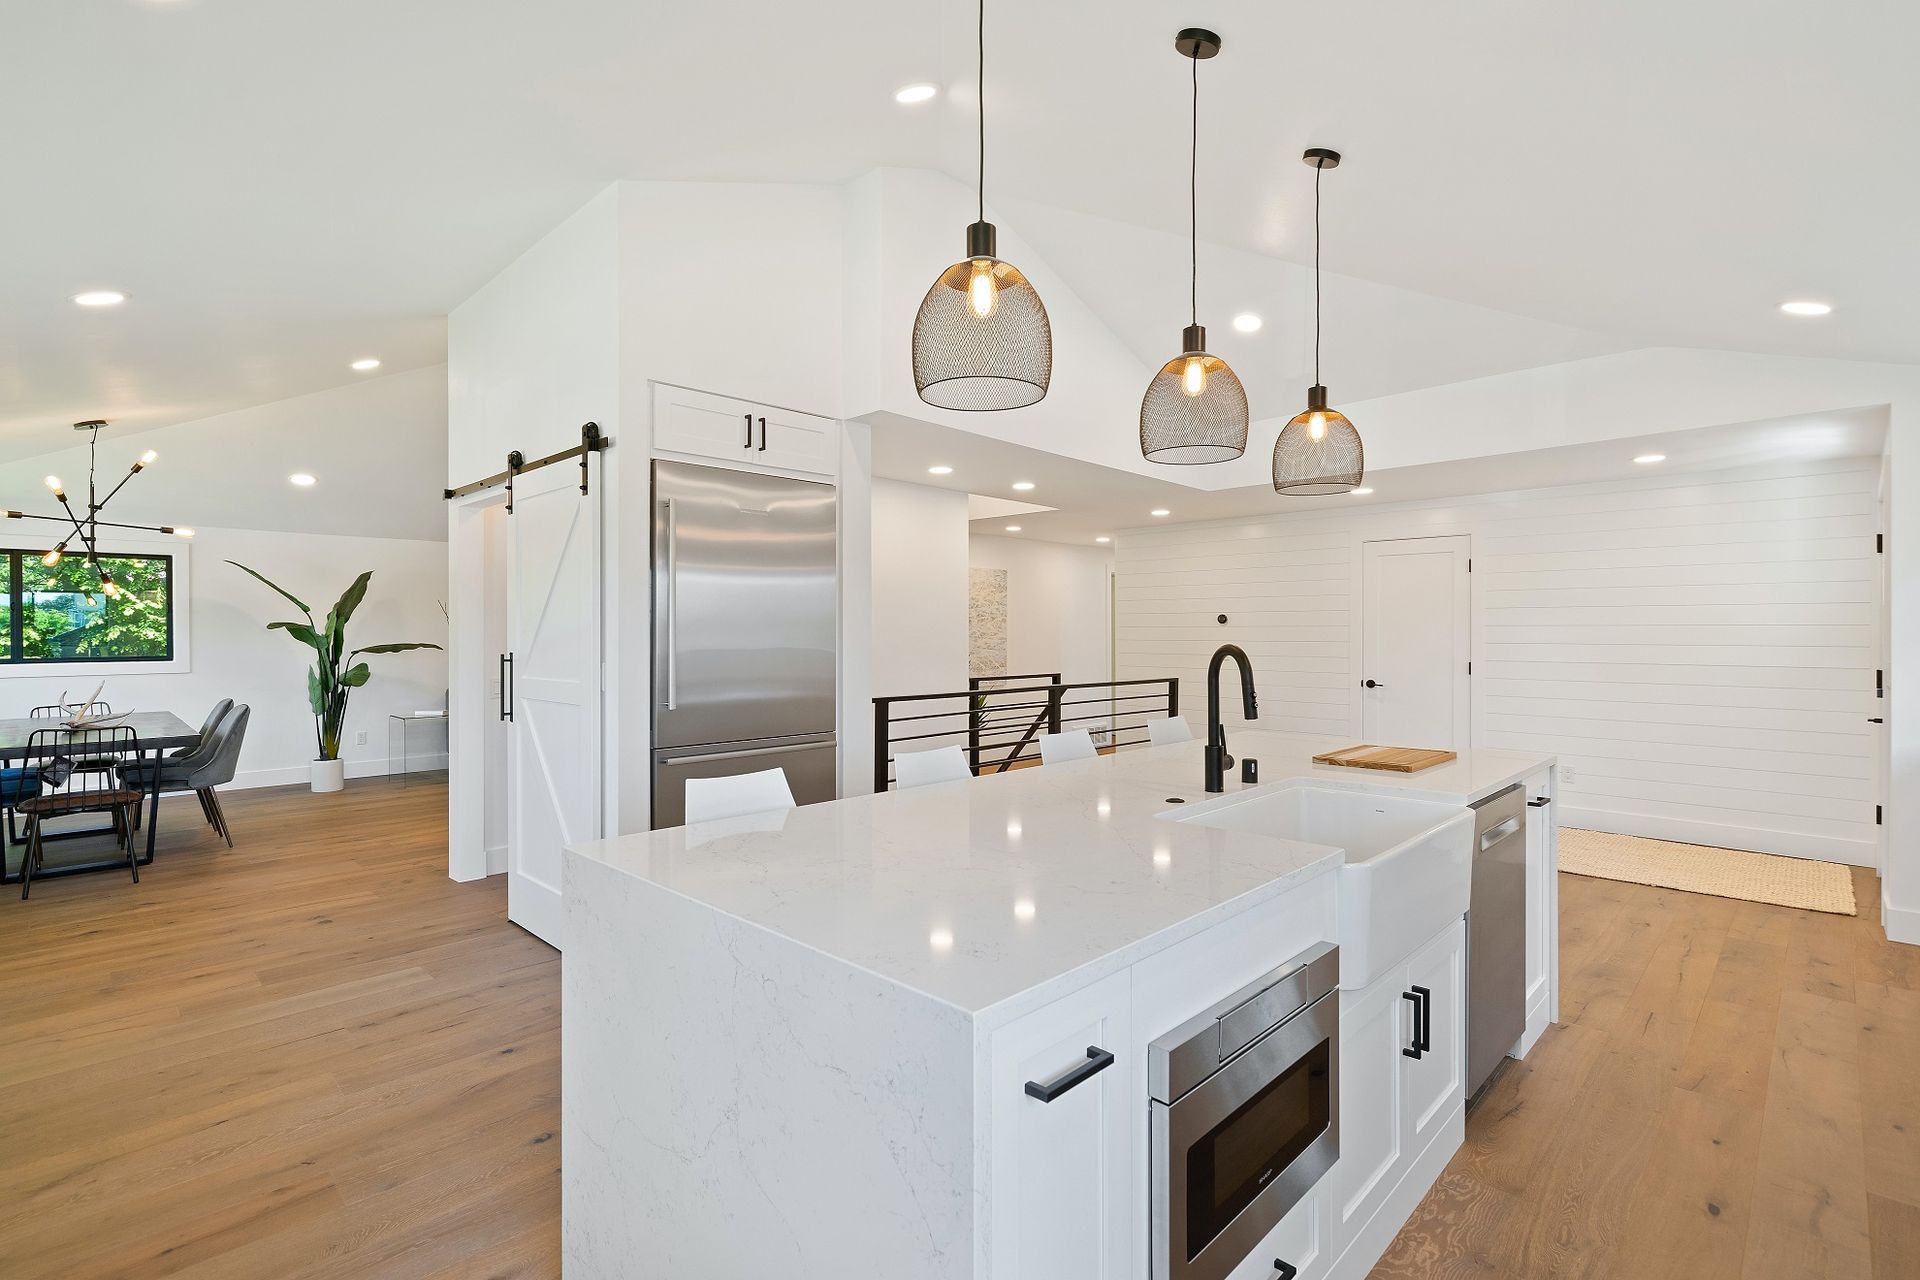 A kitchen with white cabinets and stainless steel appliances and a large island.